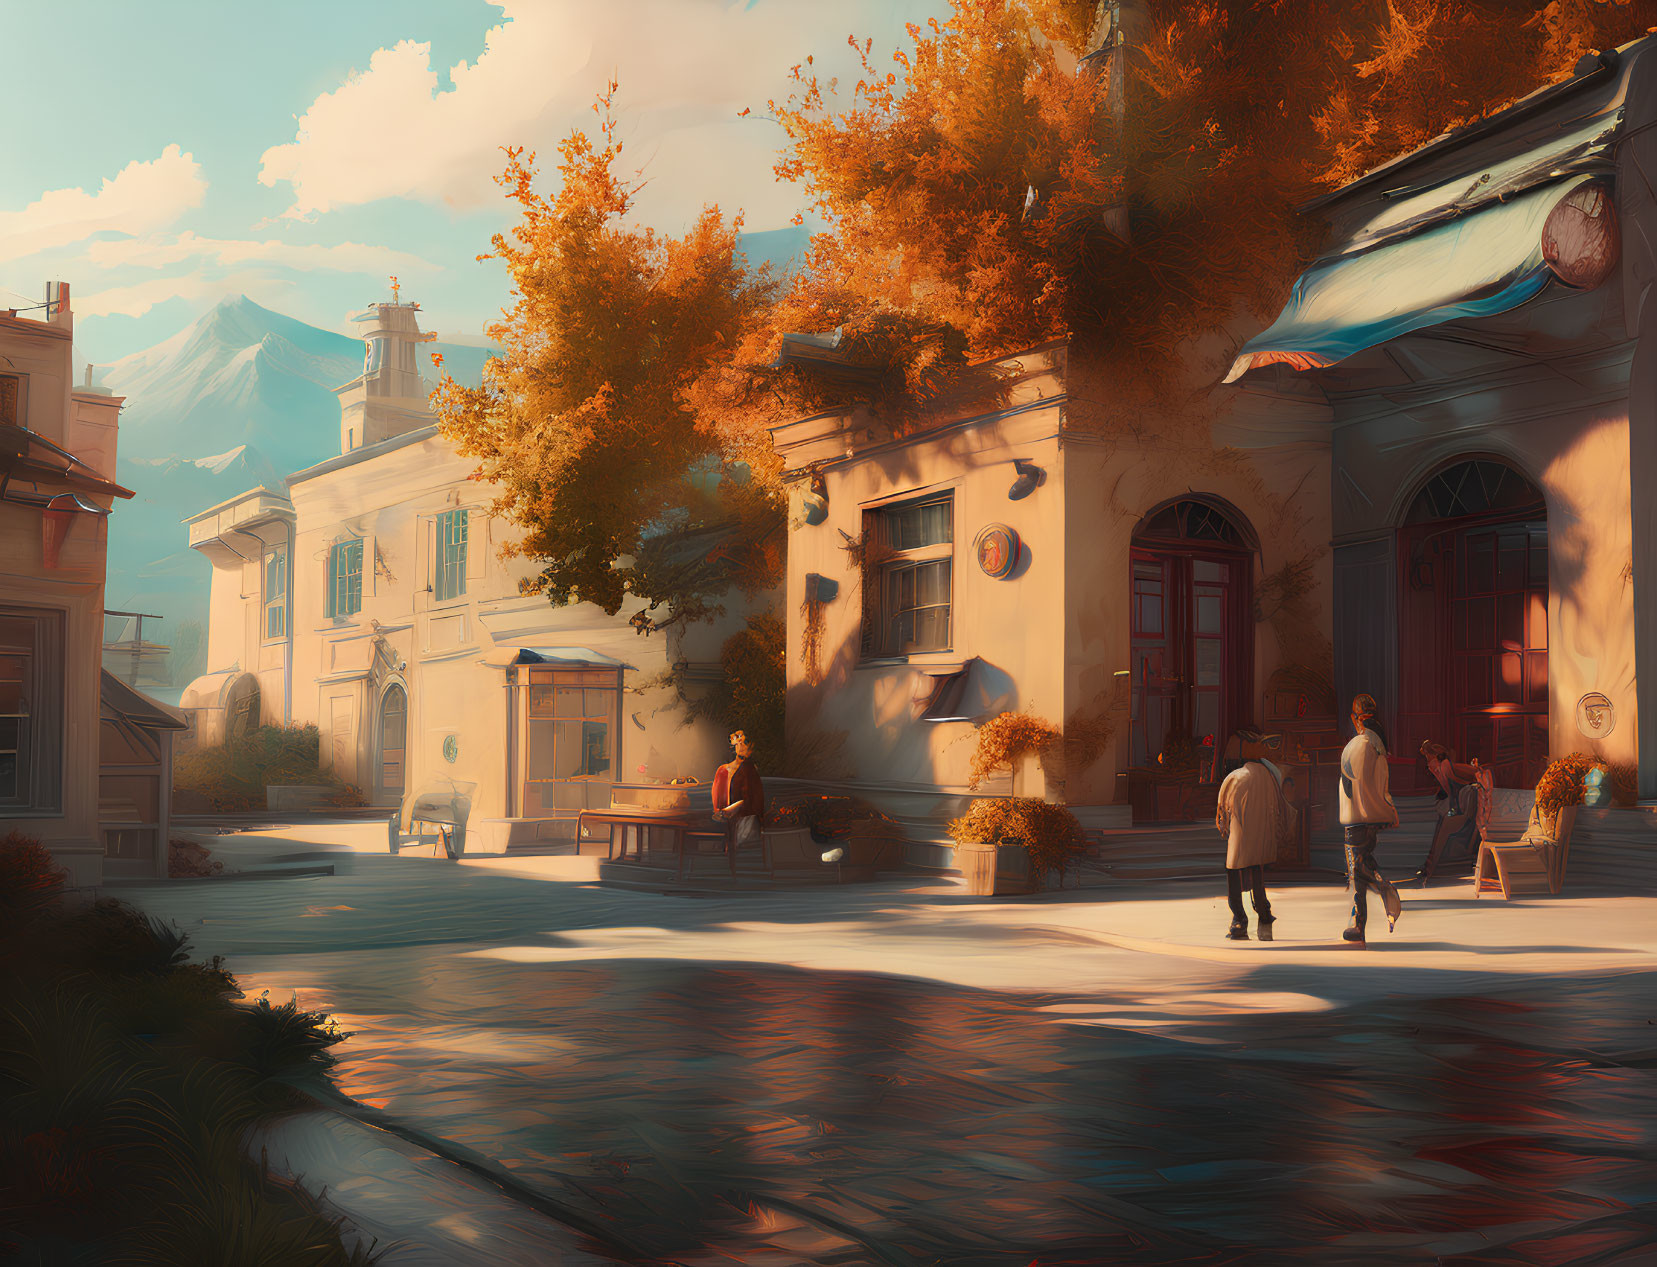 European-style buildings and autumn trees in serene town scene